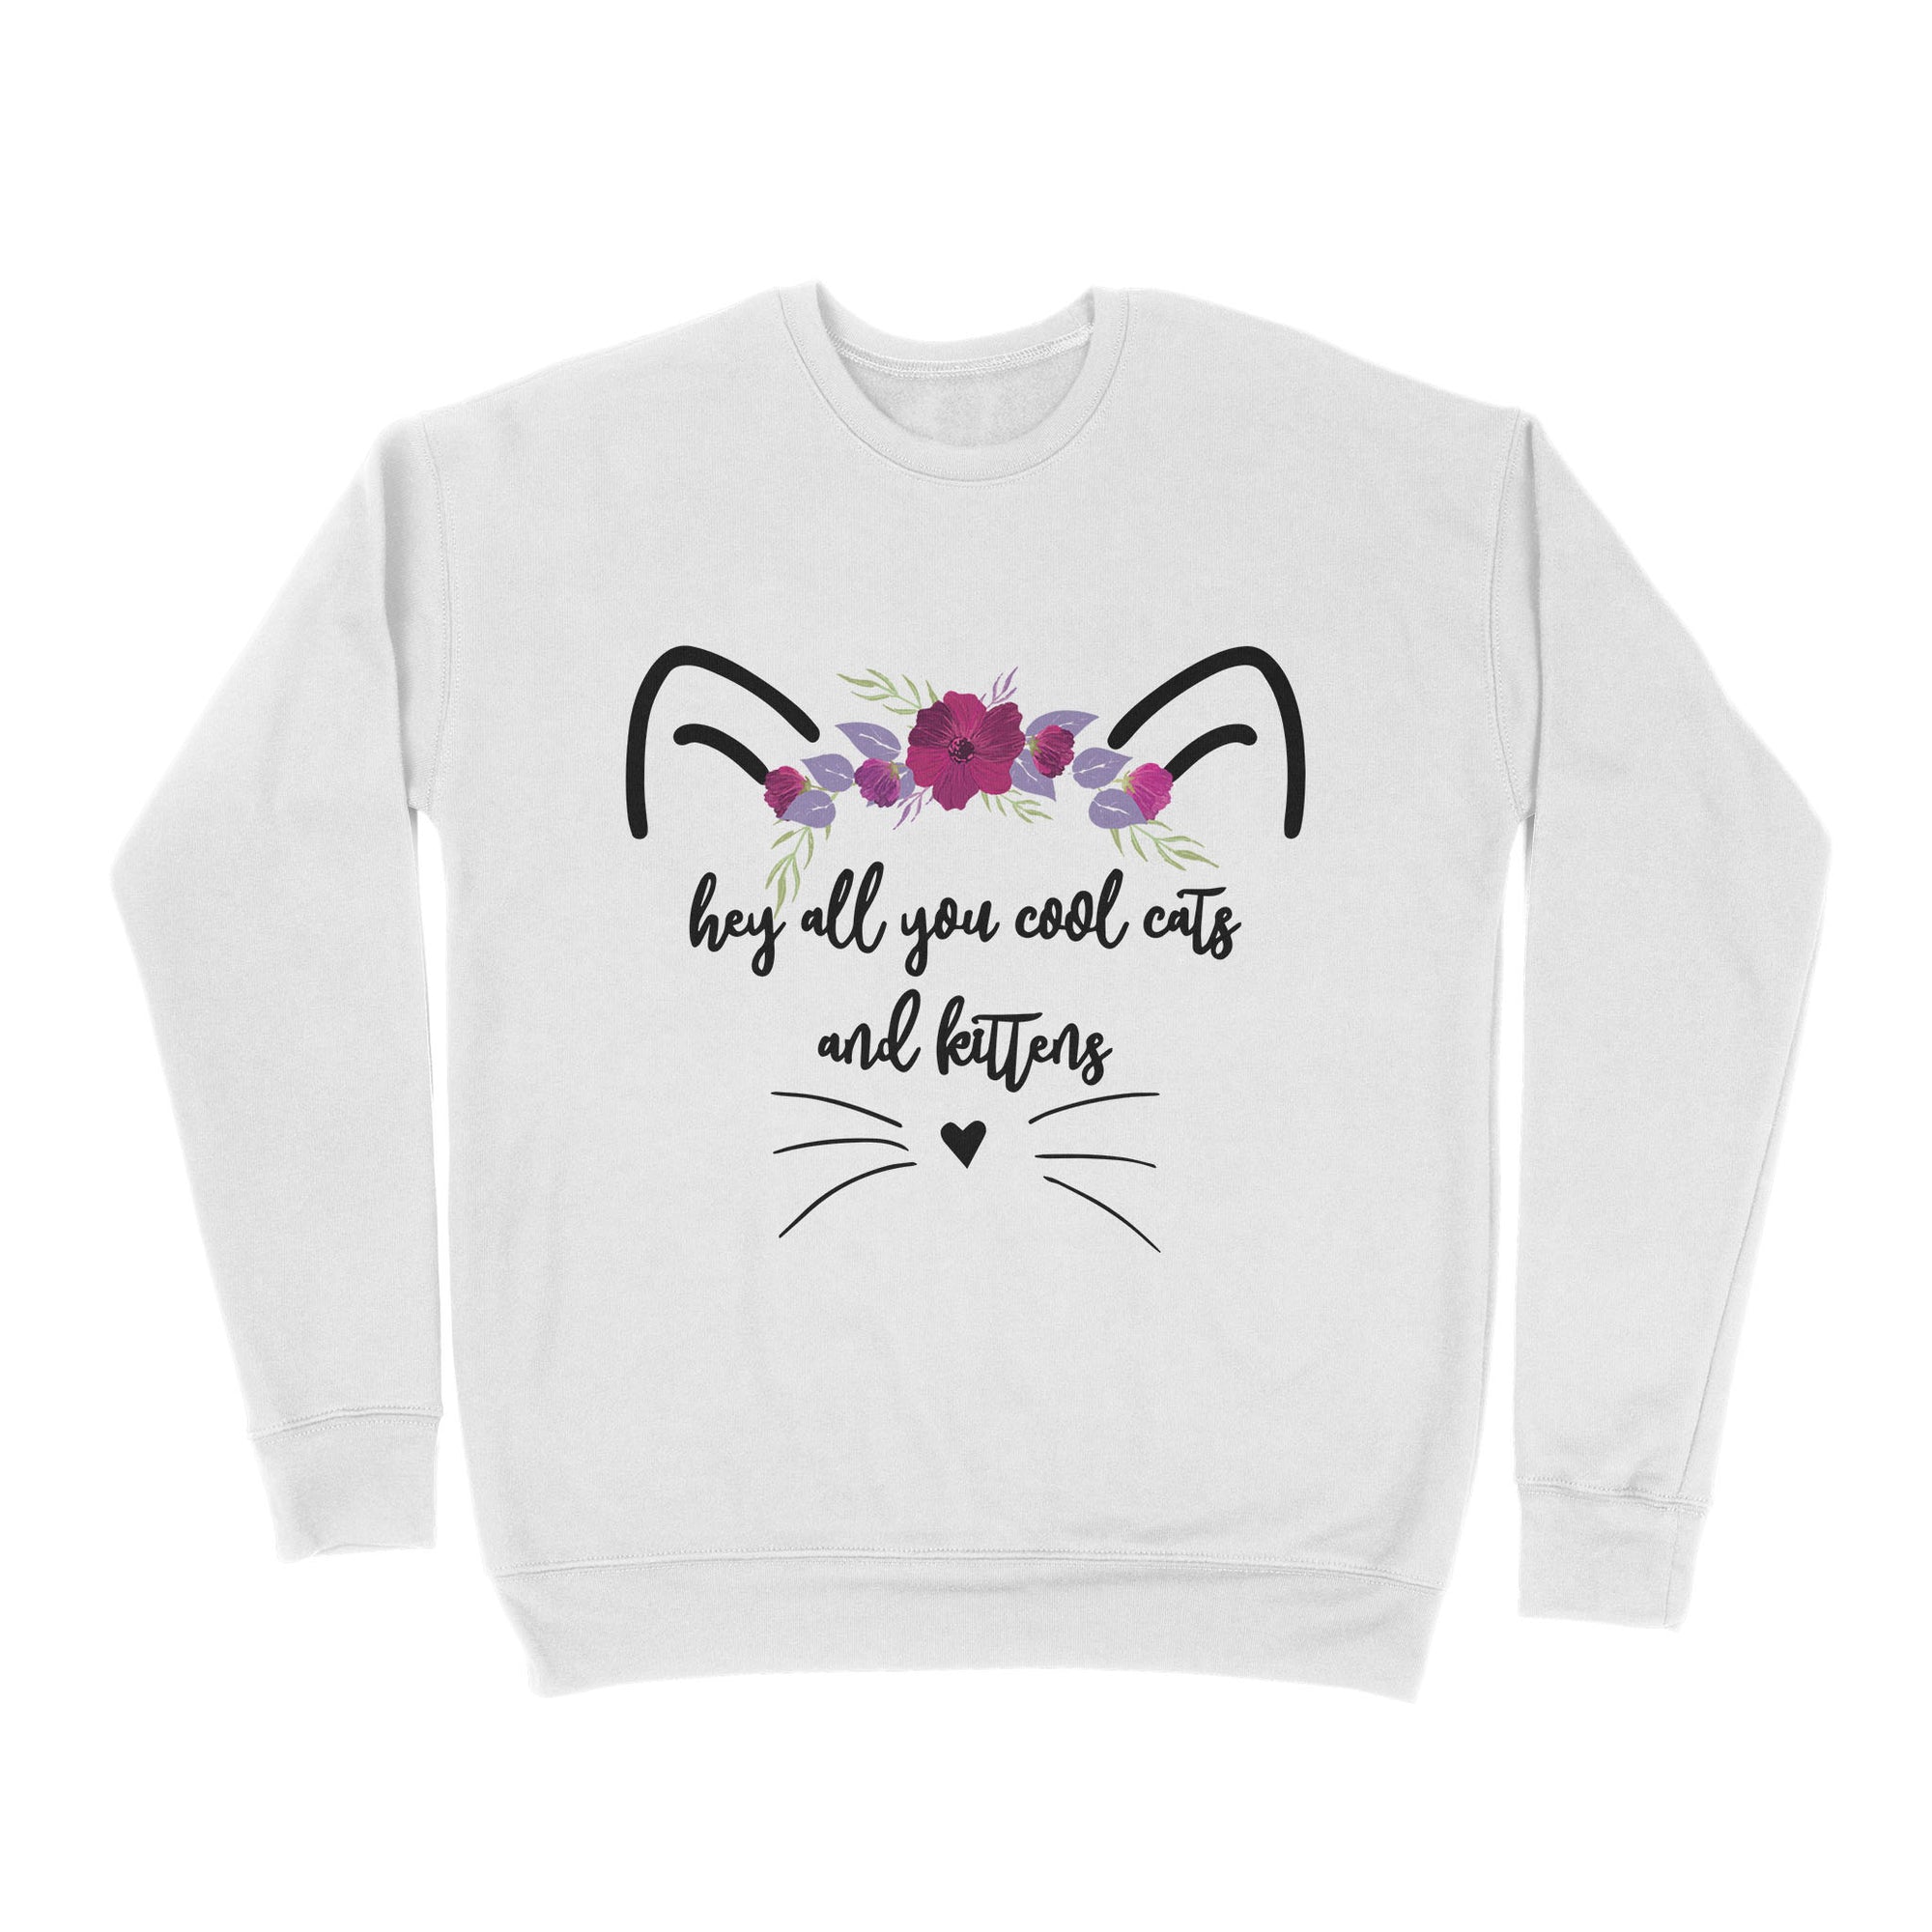 Premium Crew Neck Sweatshirt - l Hey All You Cool Cats And Kittens